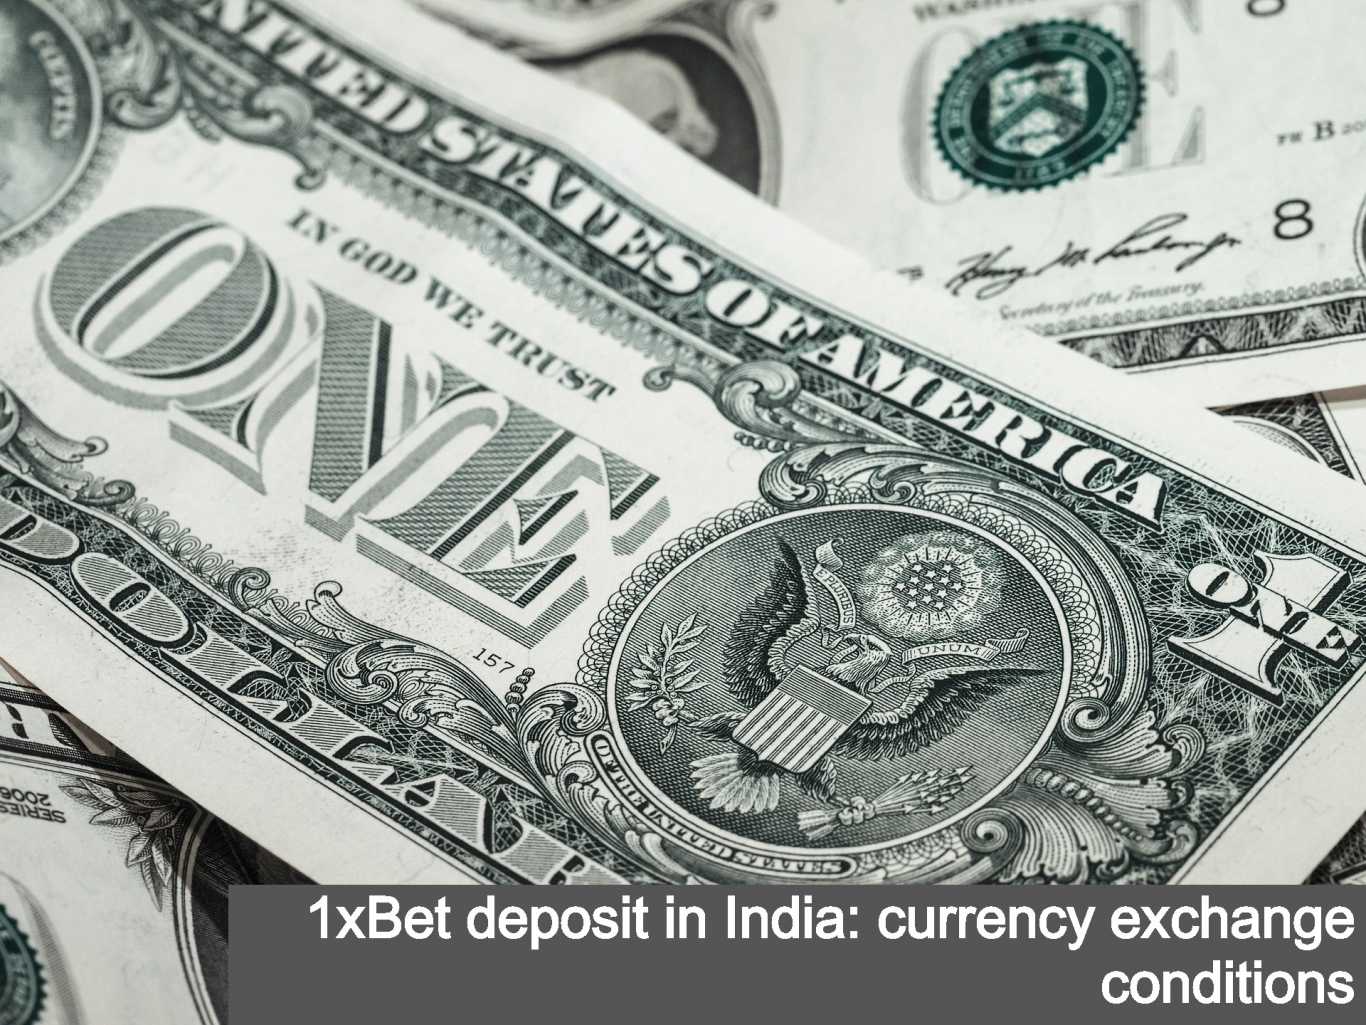 1xBet deposit in India: currency exchange conditions